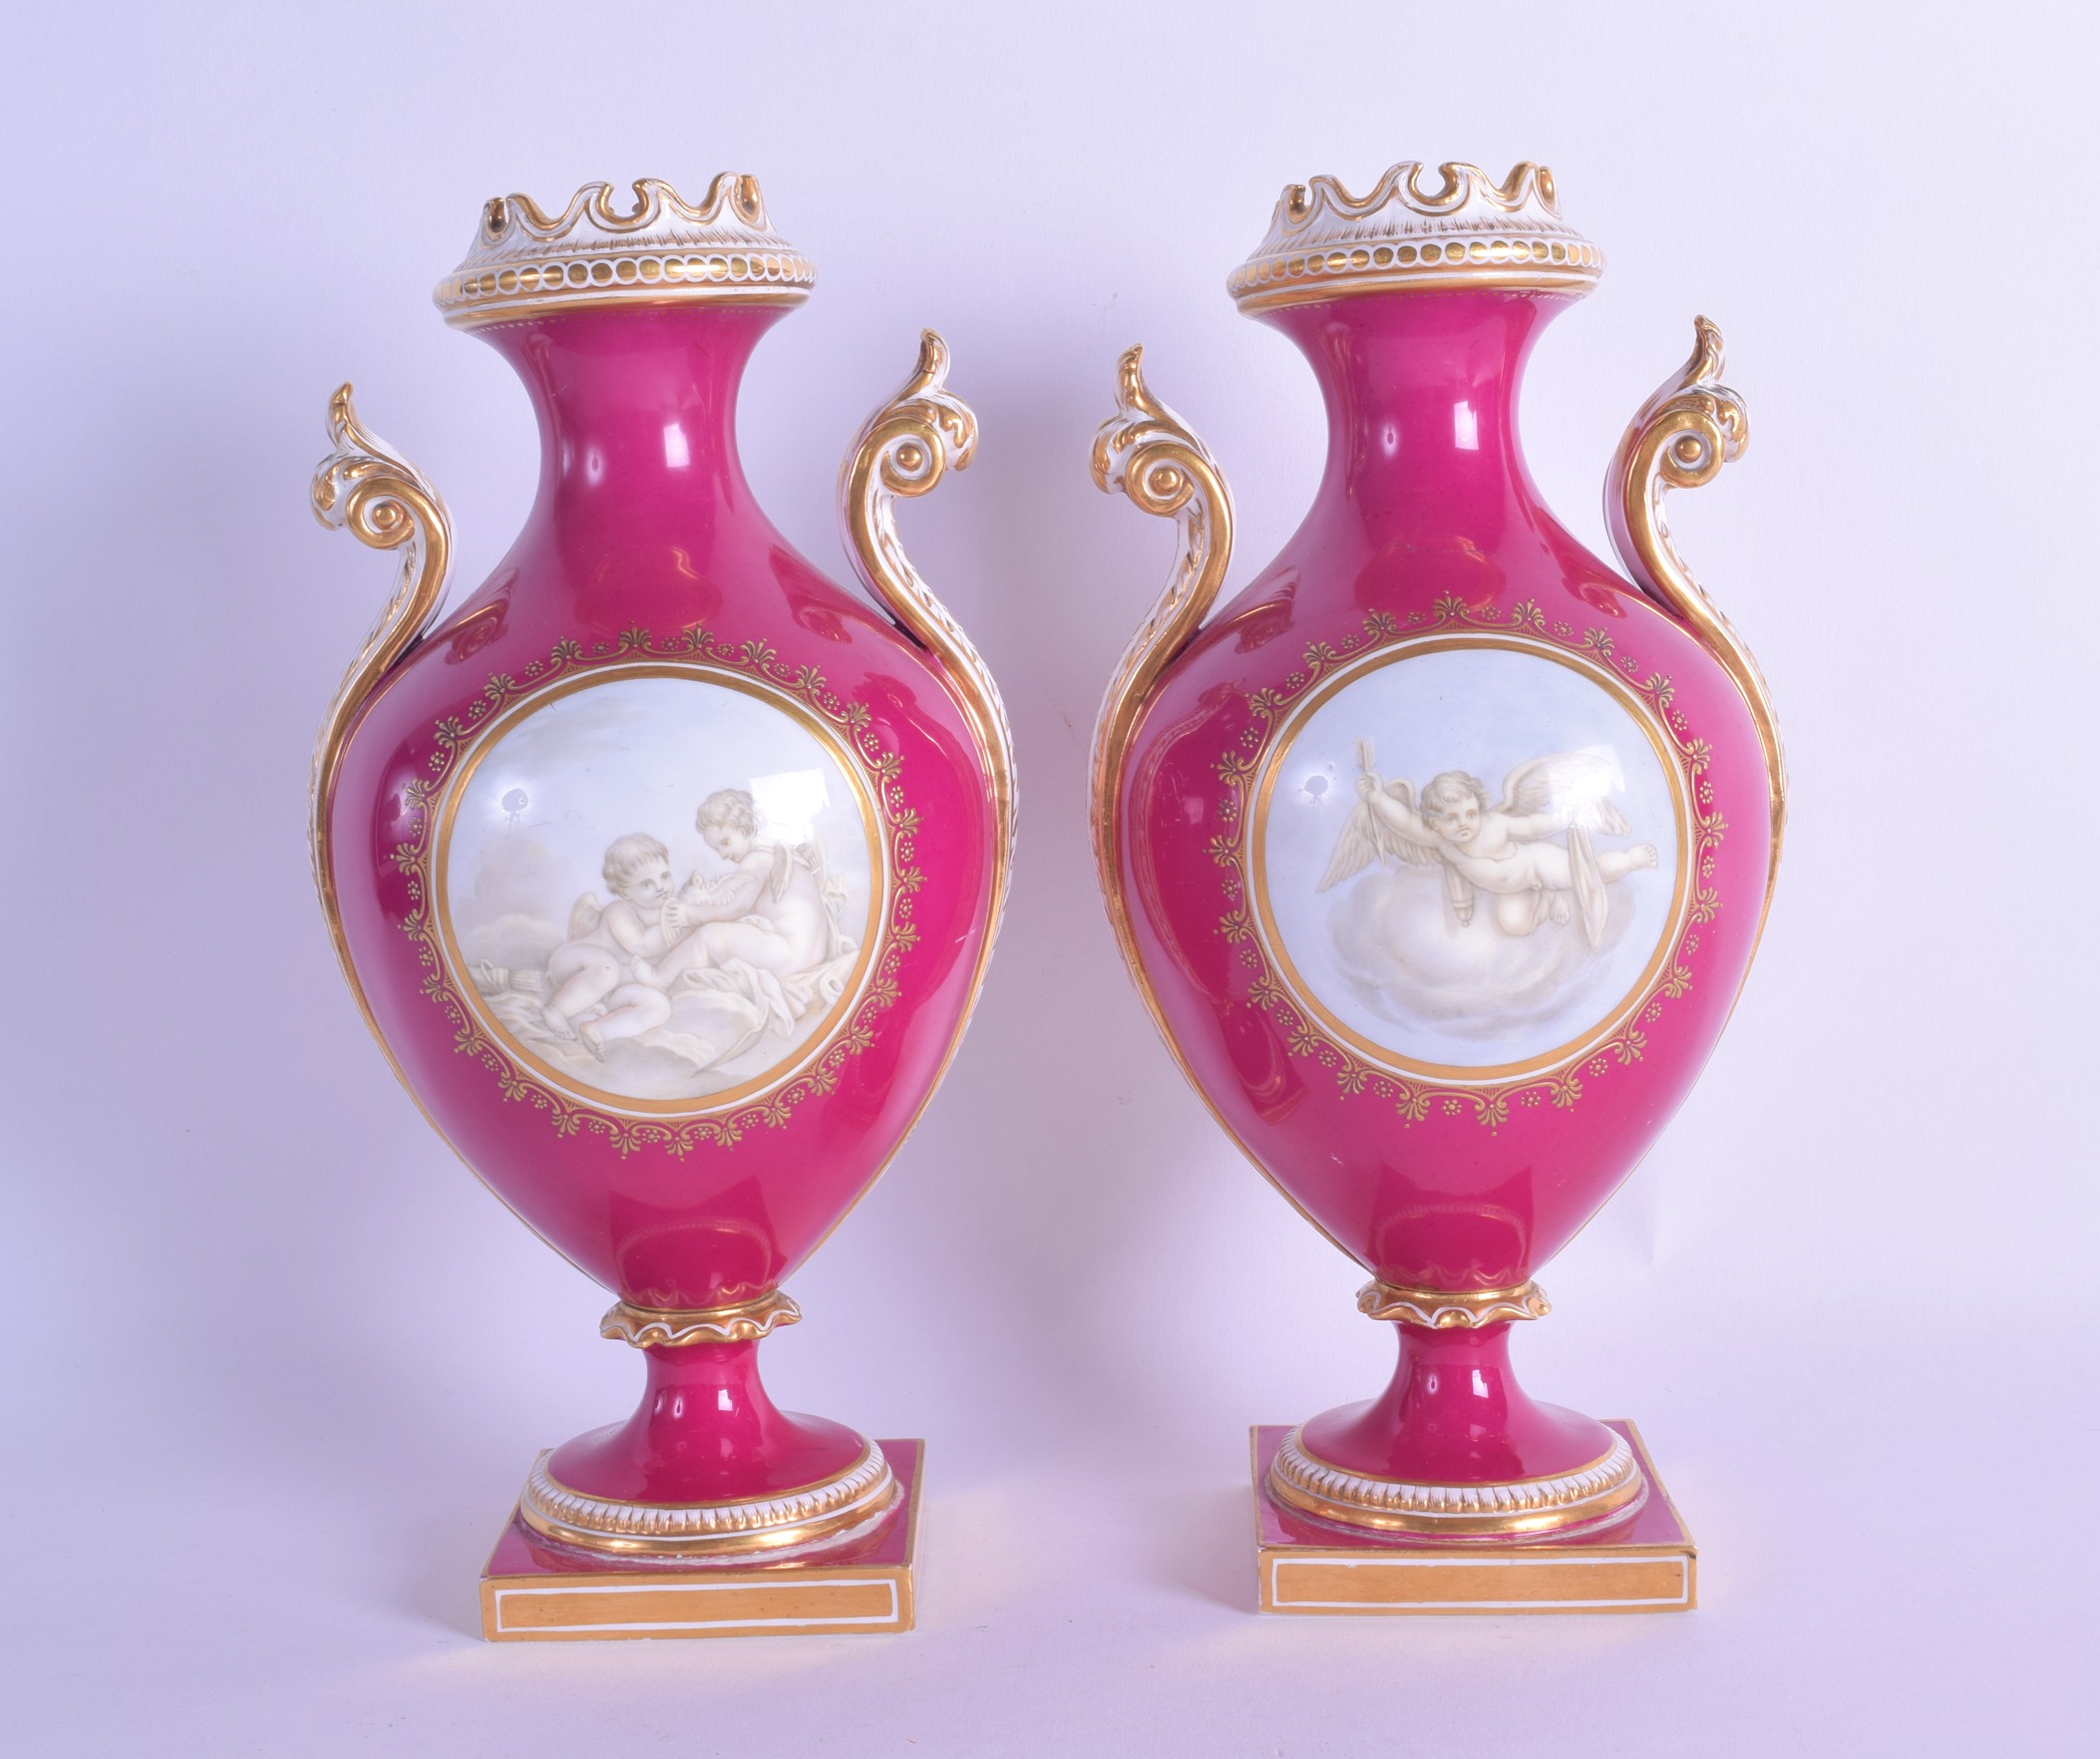 Mid 19th c. Coalport pair of vases painted en-grisaille with cherubs in Watteau style on a crimson